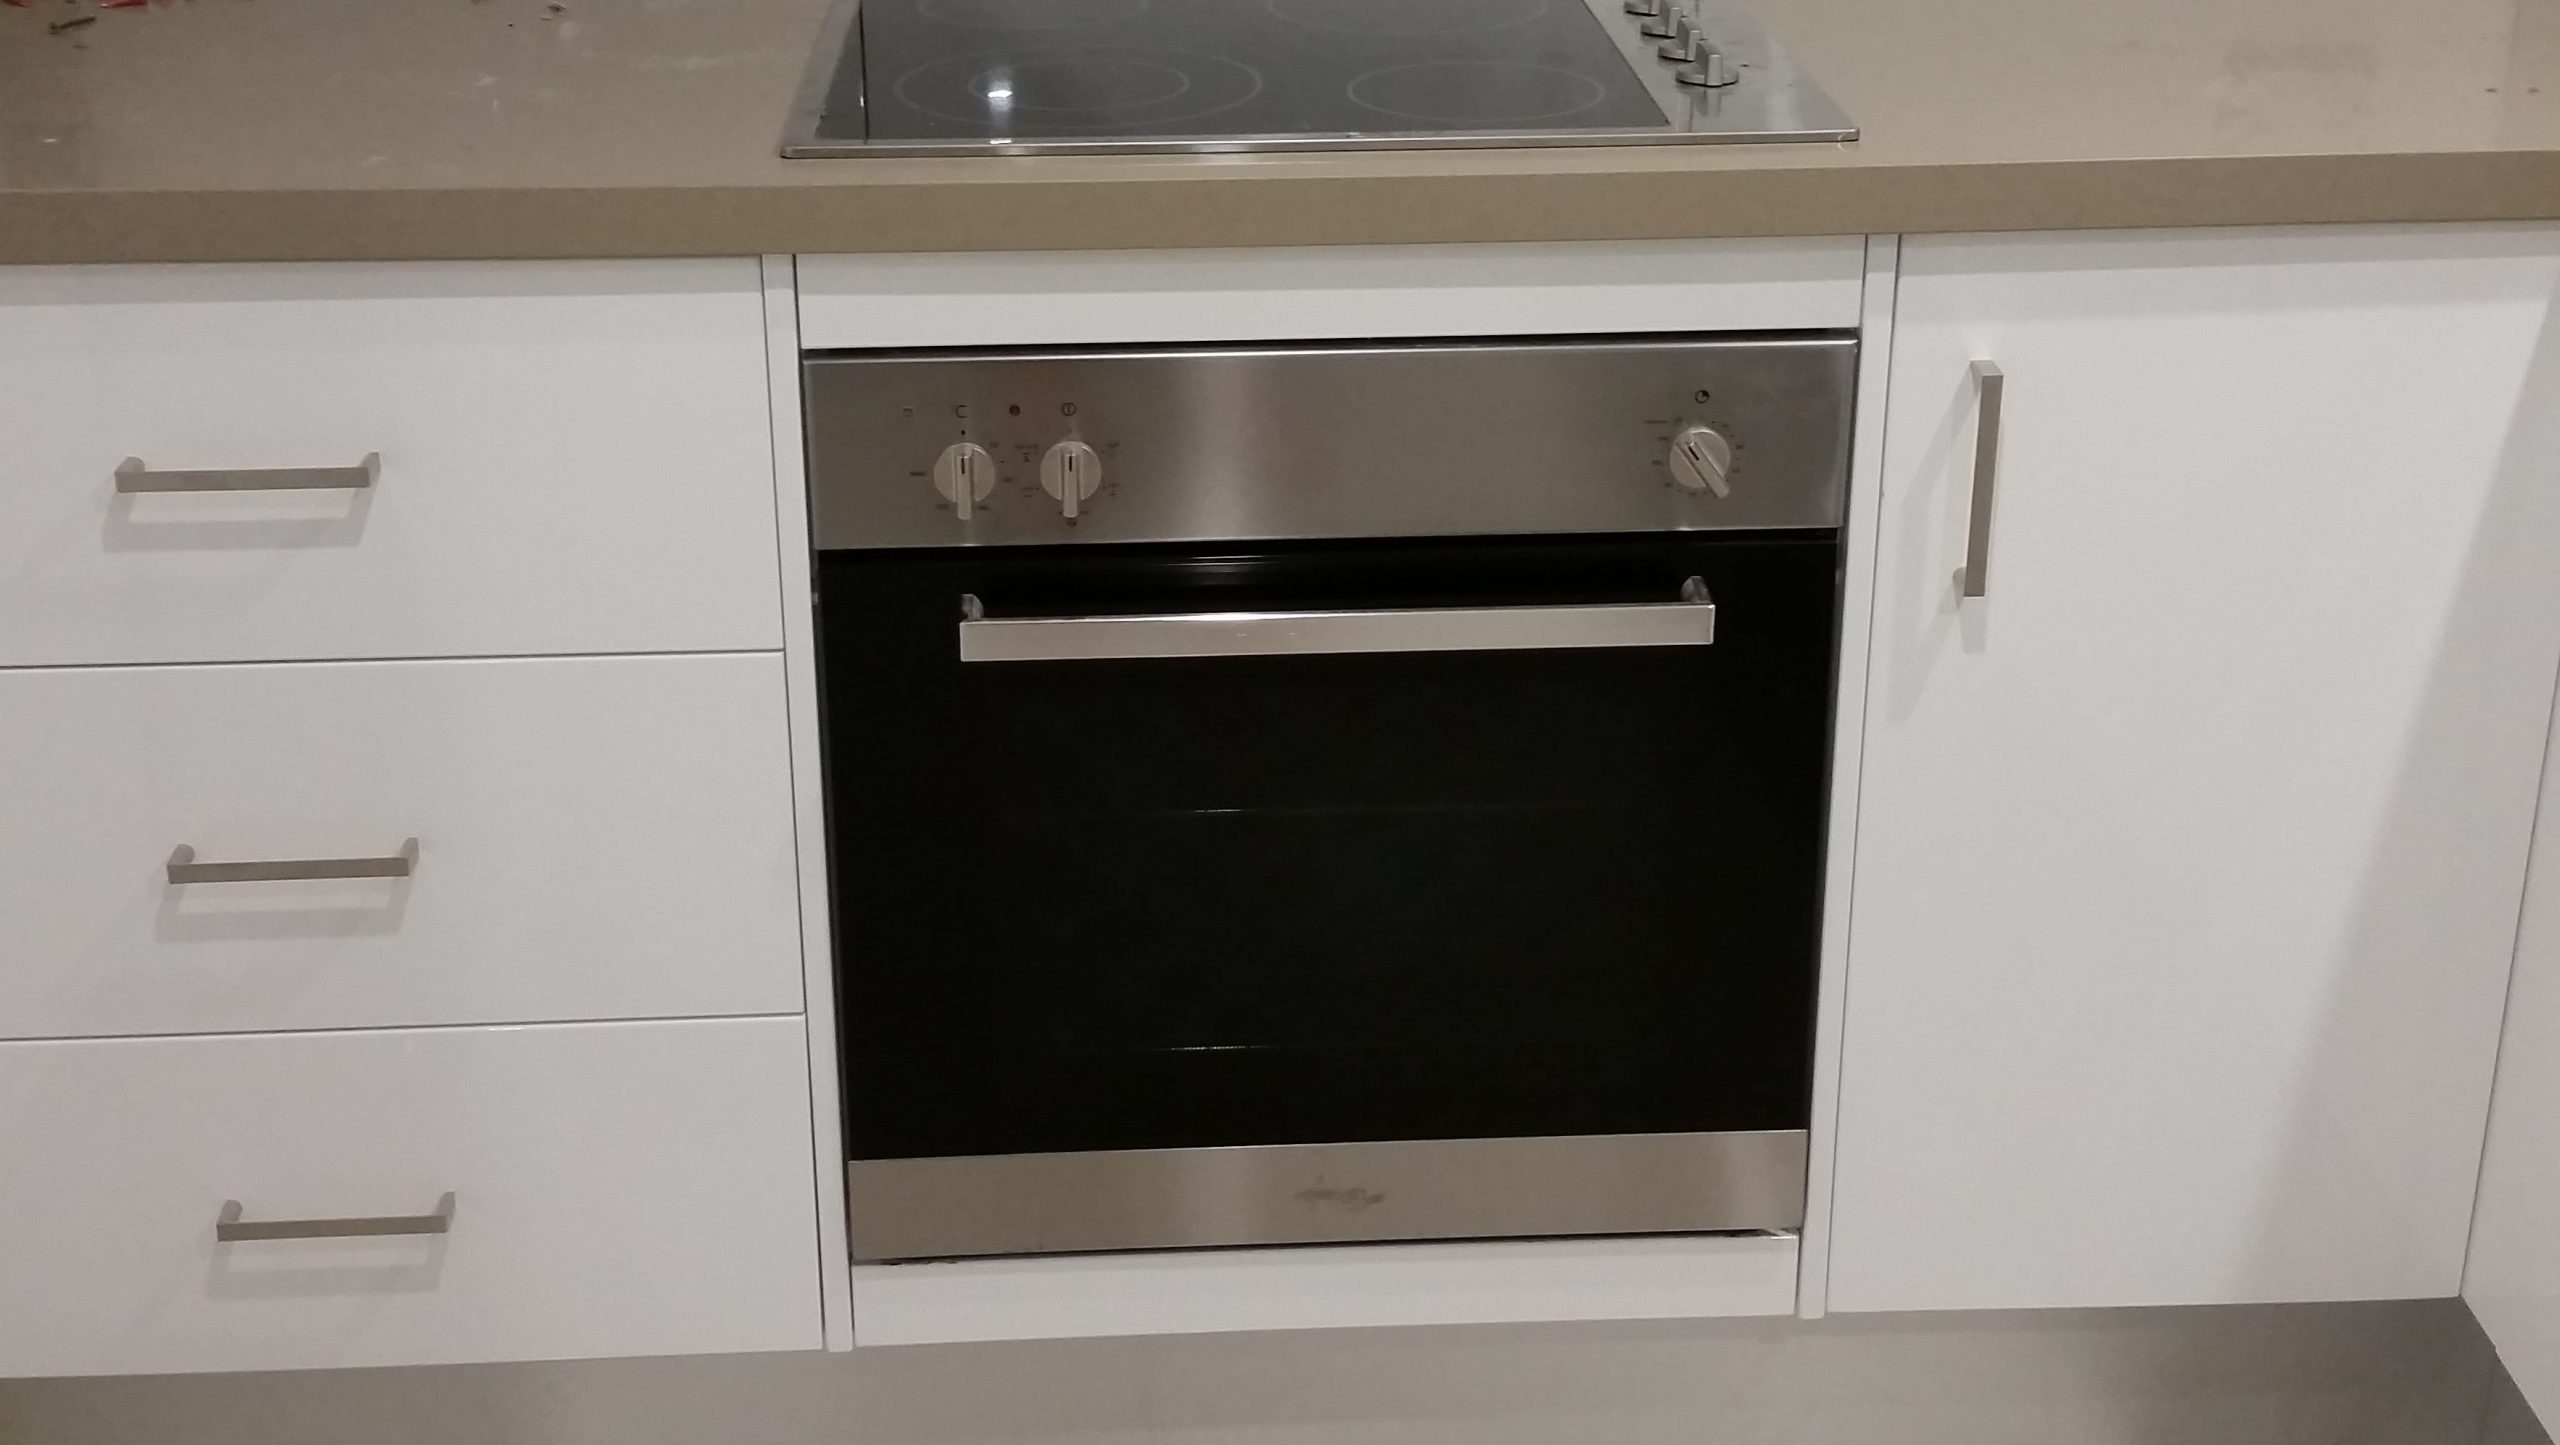 Ovenlec Morwell Oven Repairs - Talk directly to the oven repair and oven door repair specialist for a free over the phone repair estimate.